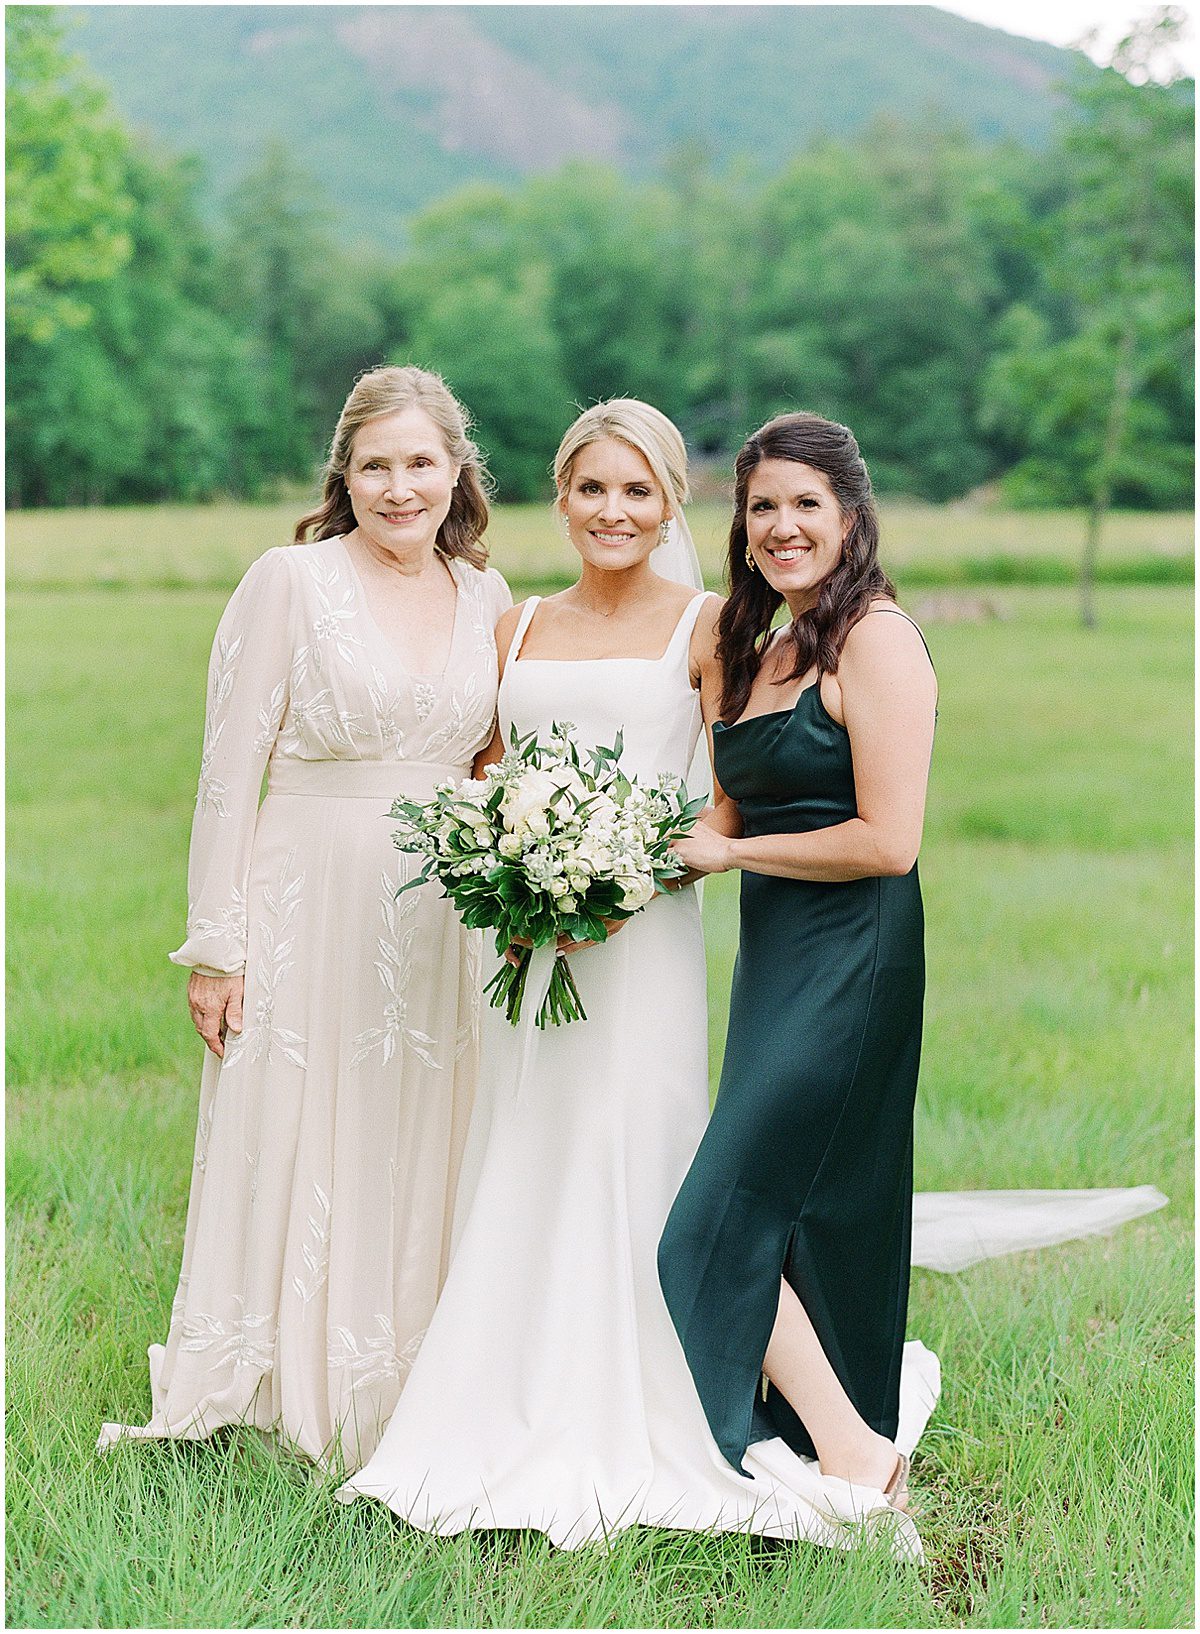 Bride with Mom and Friend Photo